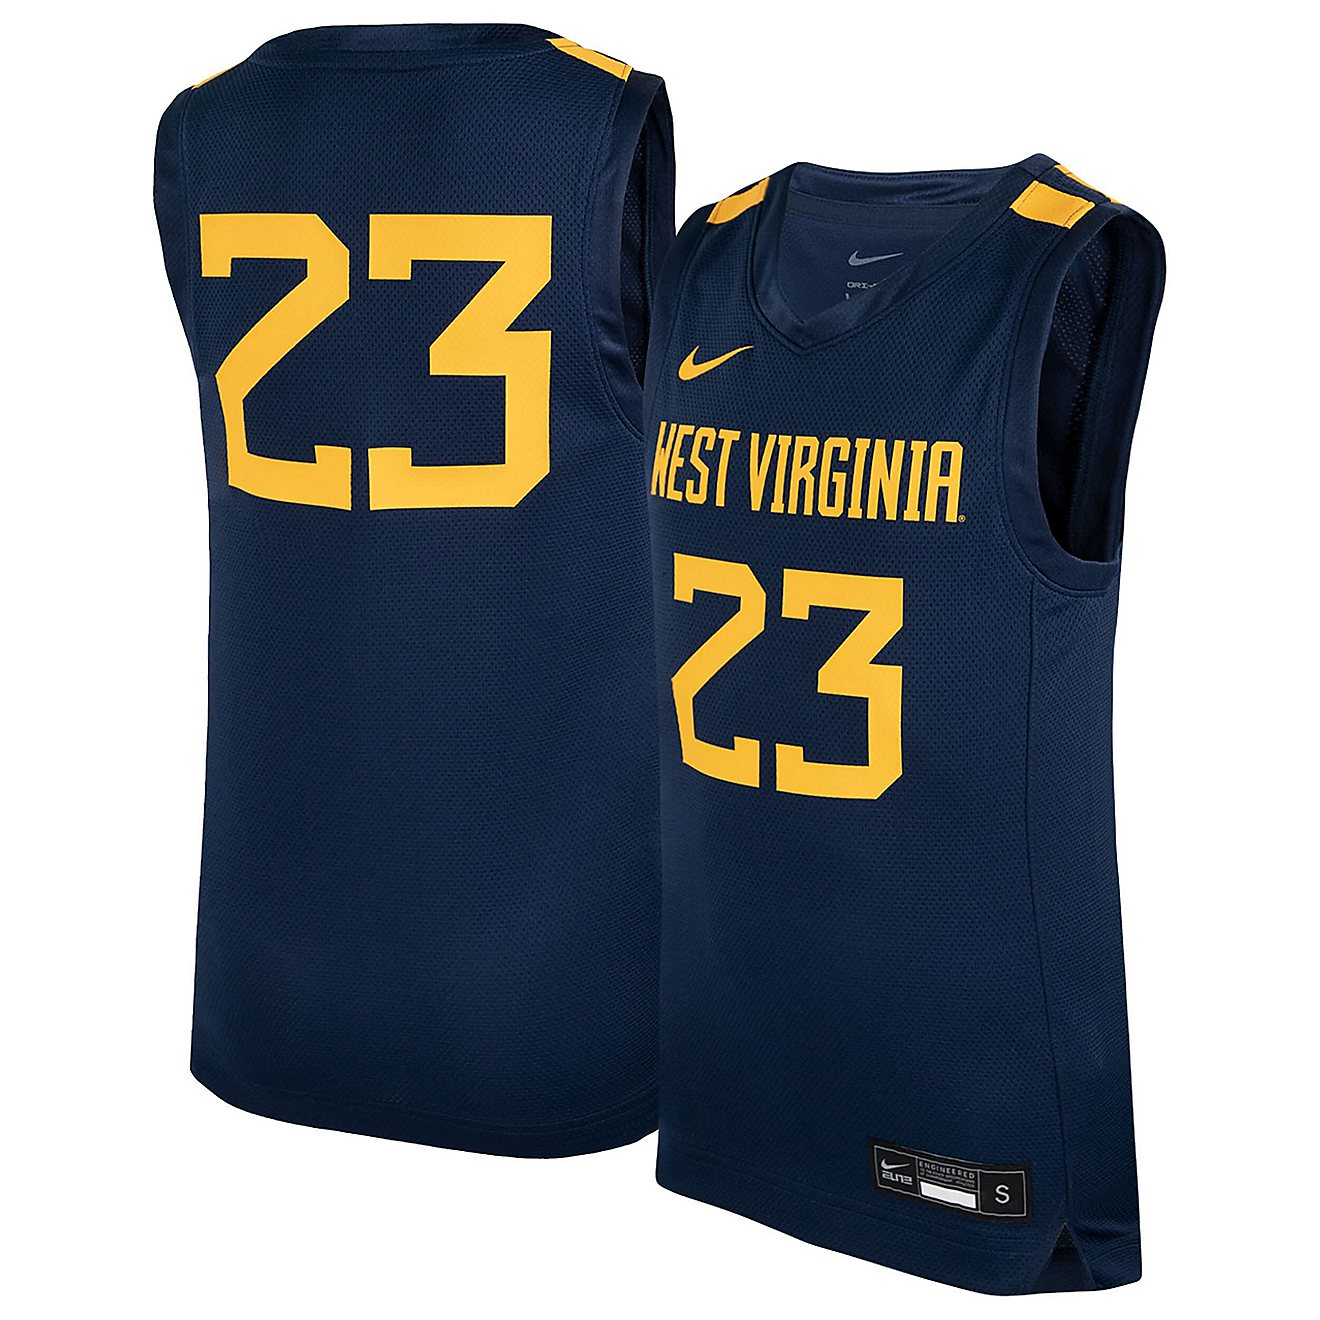 Youth Nike 23 West Virginia Mountaineers Icon Replica Basketball Jersey                                                          - view number 1